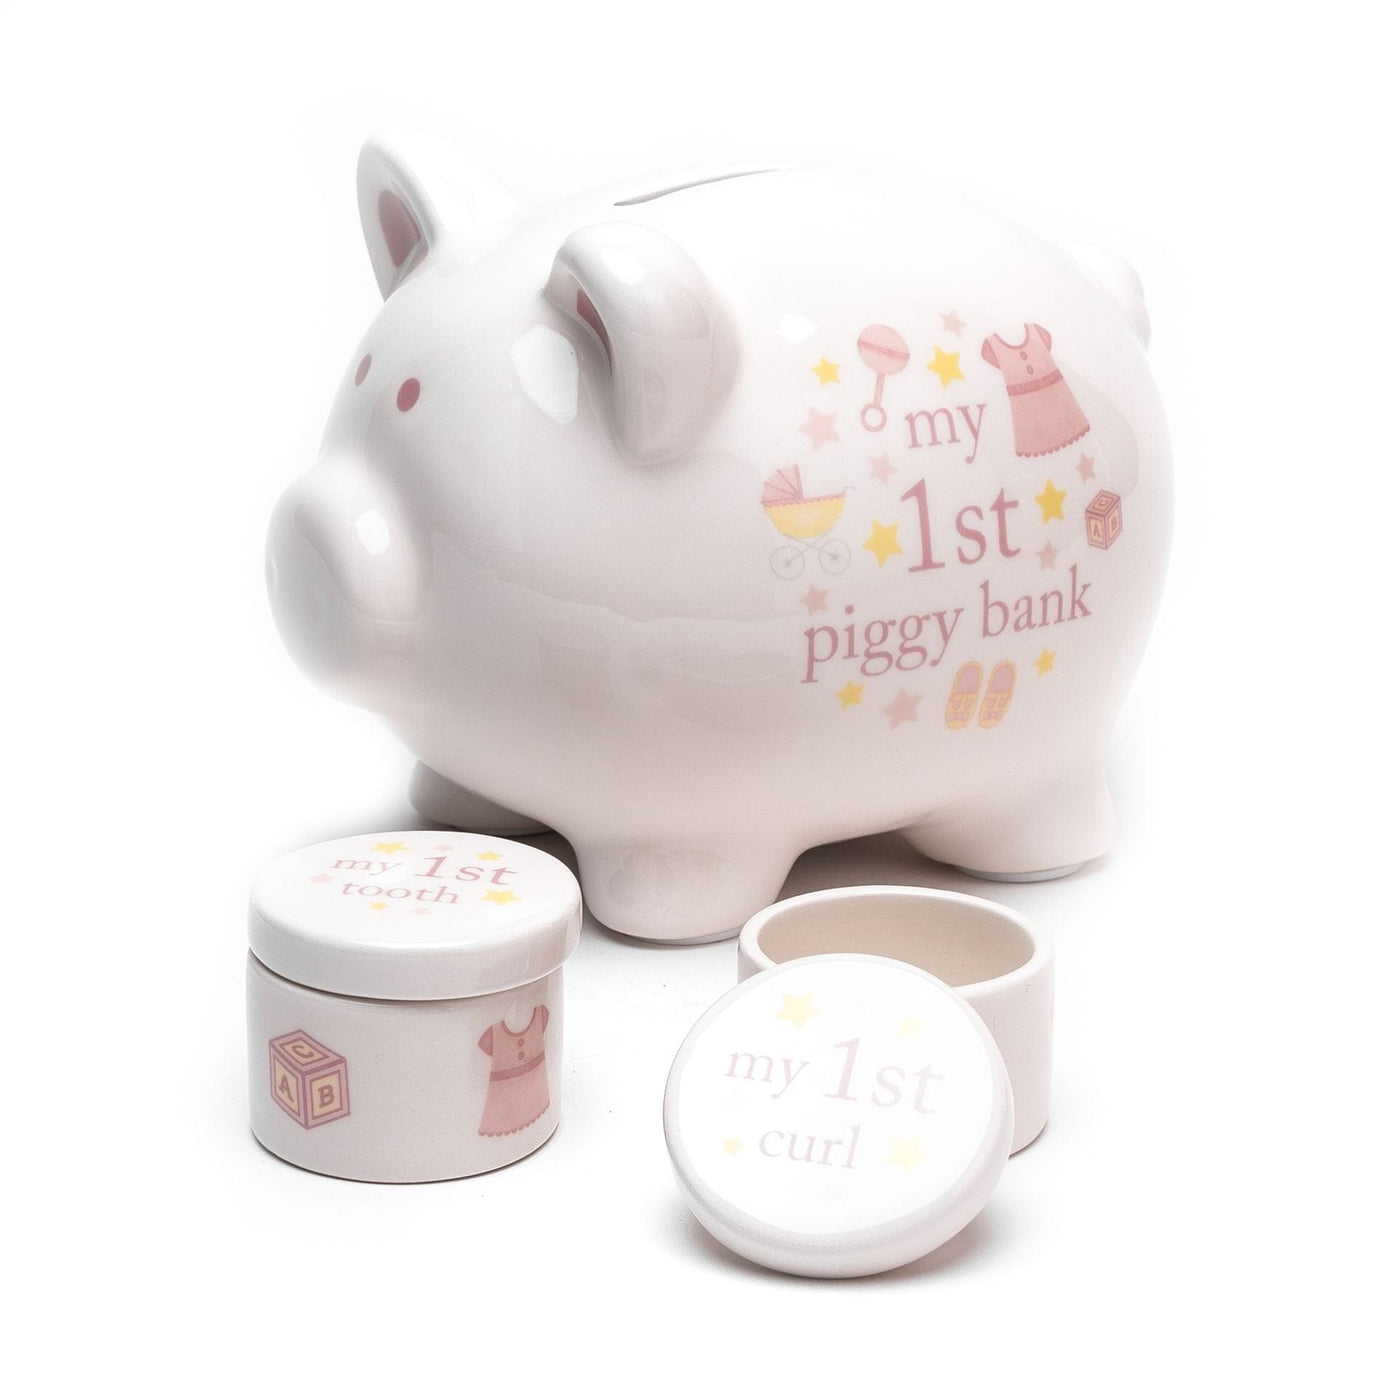 Widdop Gifts Money Boxes & Pots Ceramic Baby's Pink Piggy Bank, Tooth and Curl Gift Set